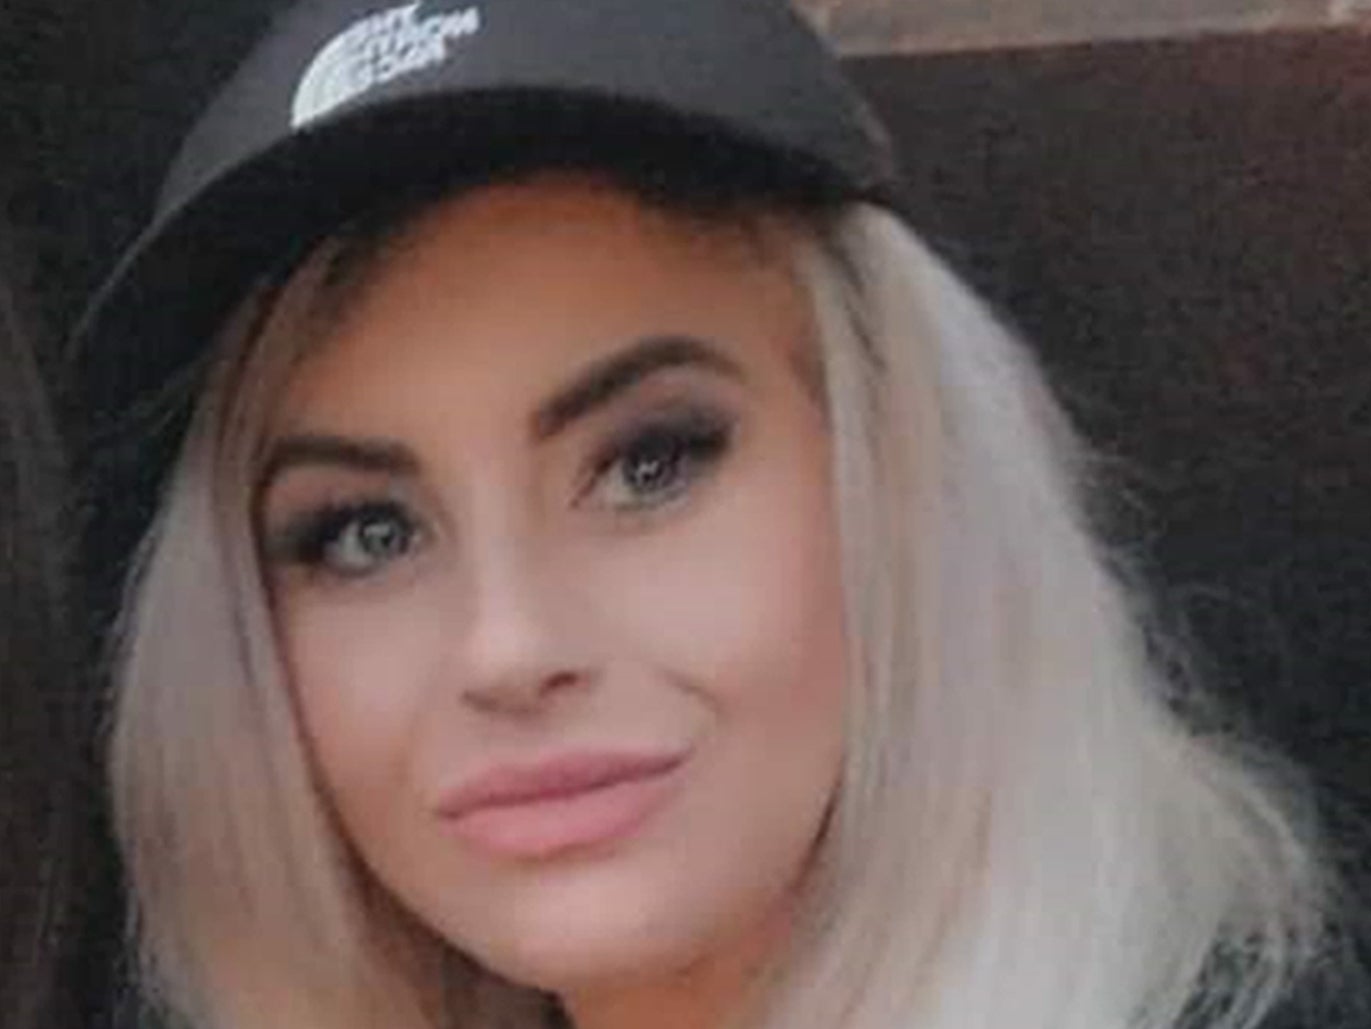 A man is set to appear in court charged over the death of Aimee Jane Cannon in West Lothian